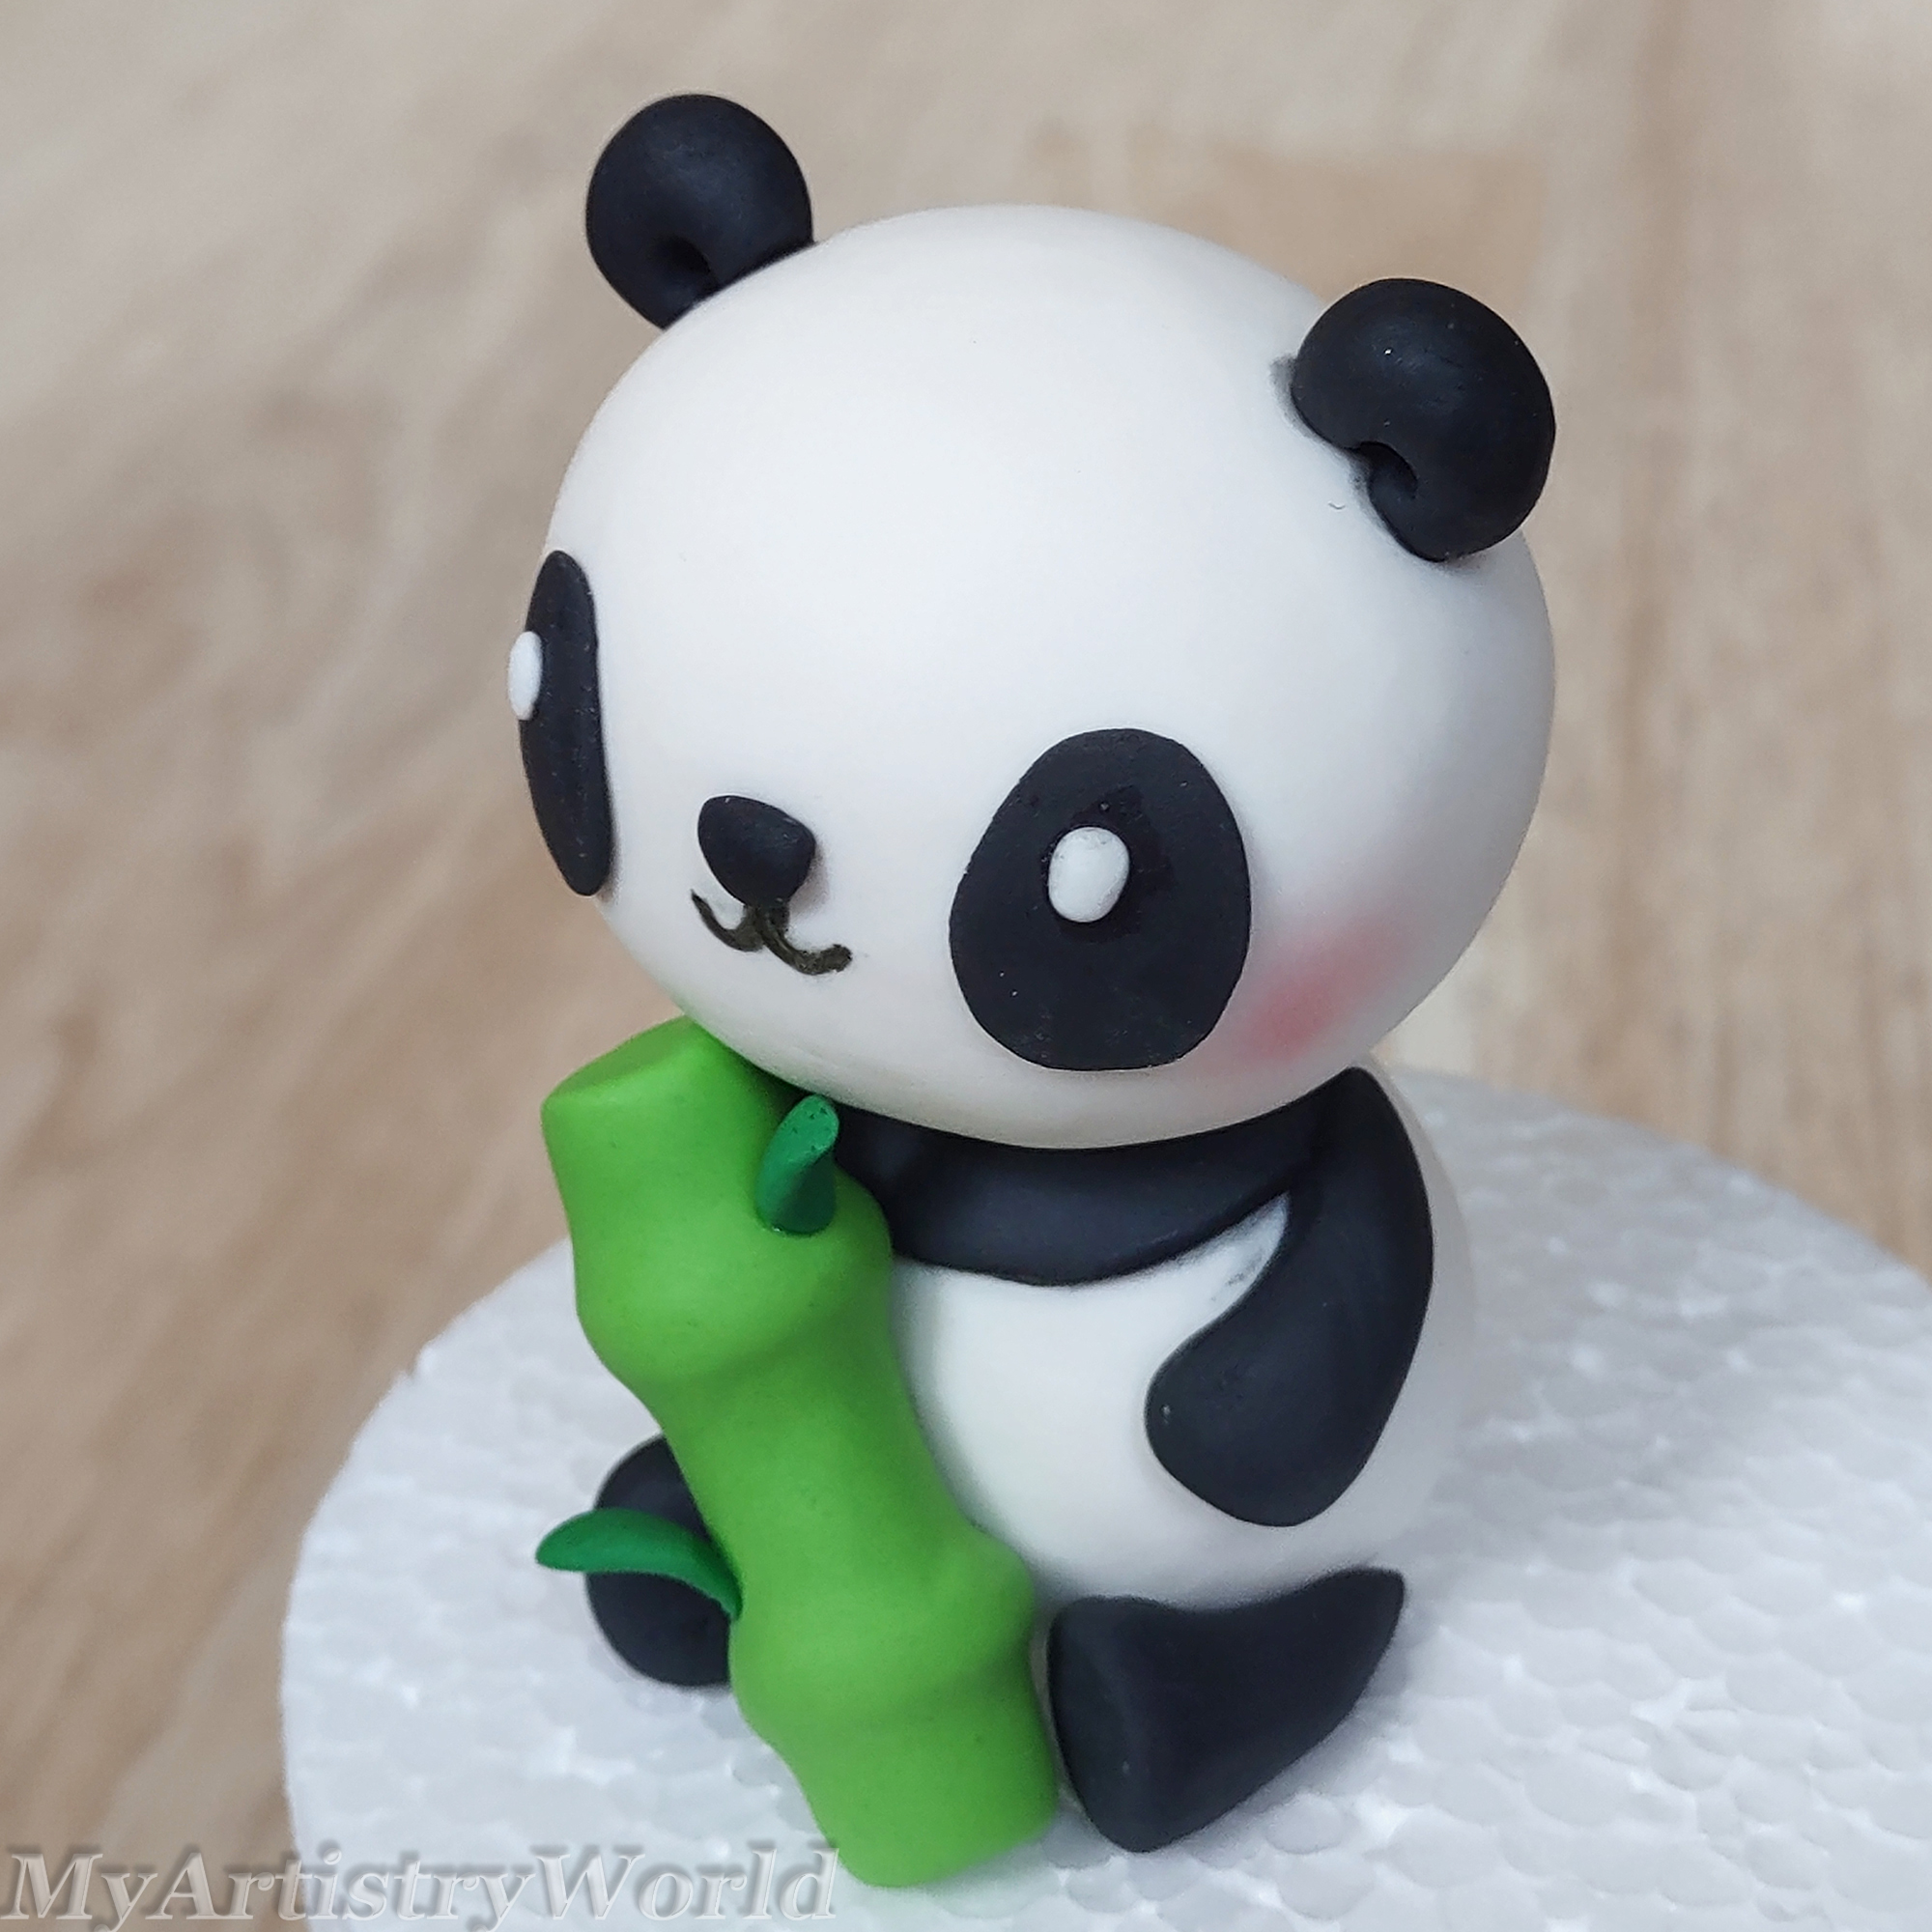 Edible Panda with Bamboo cake topper. - My Artistry World